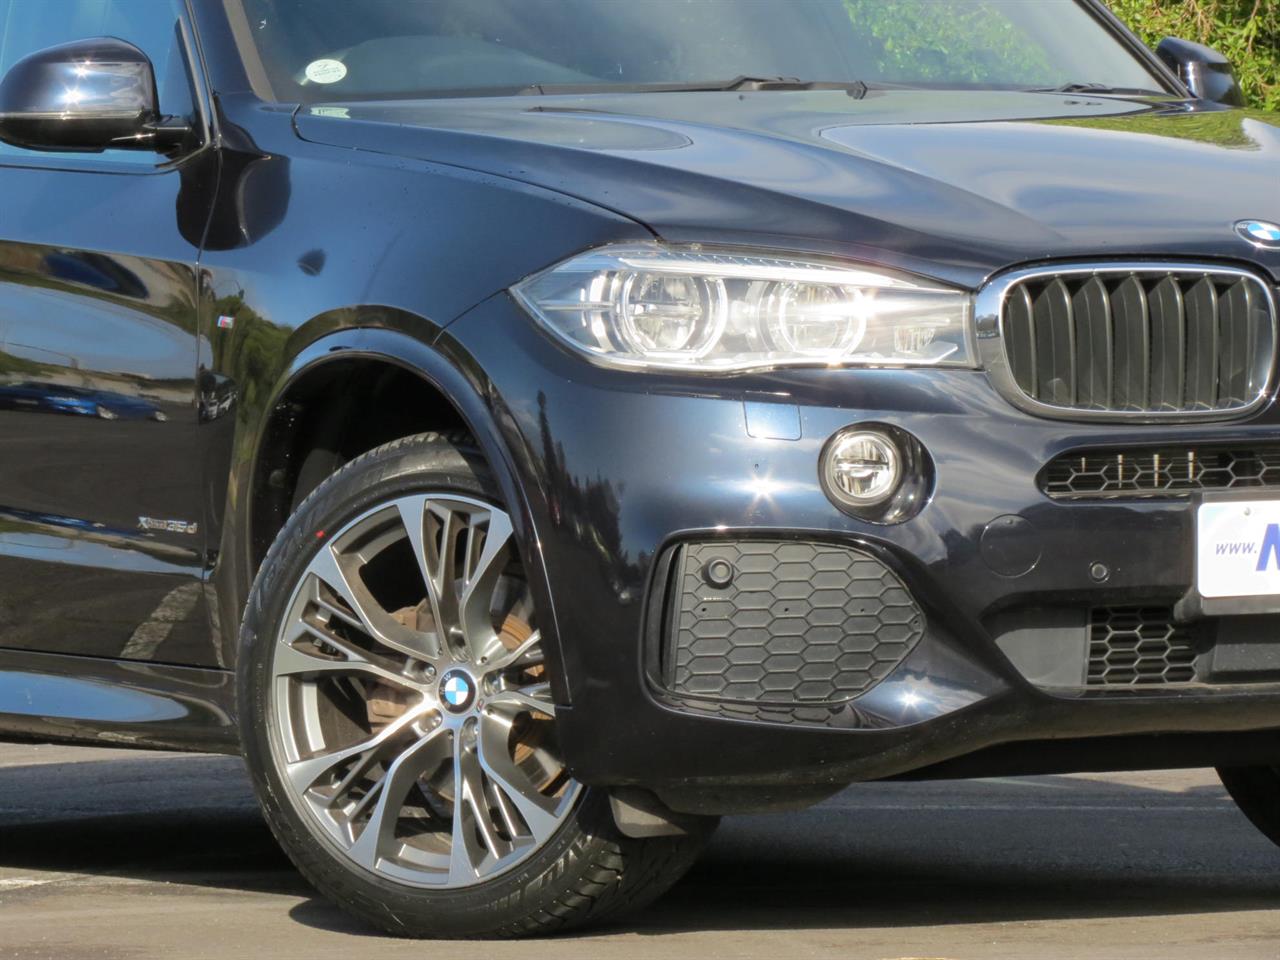 2018 BMW X5 only $190 weekly